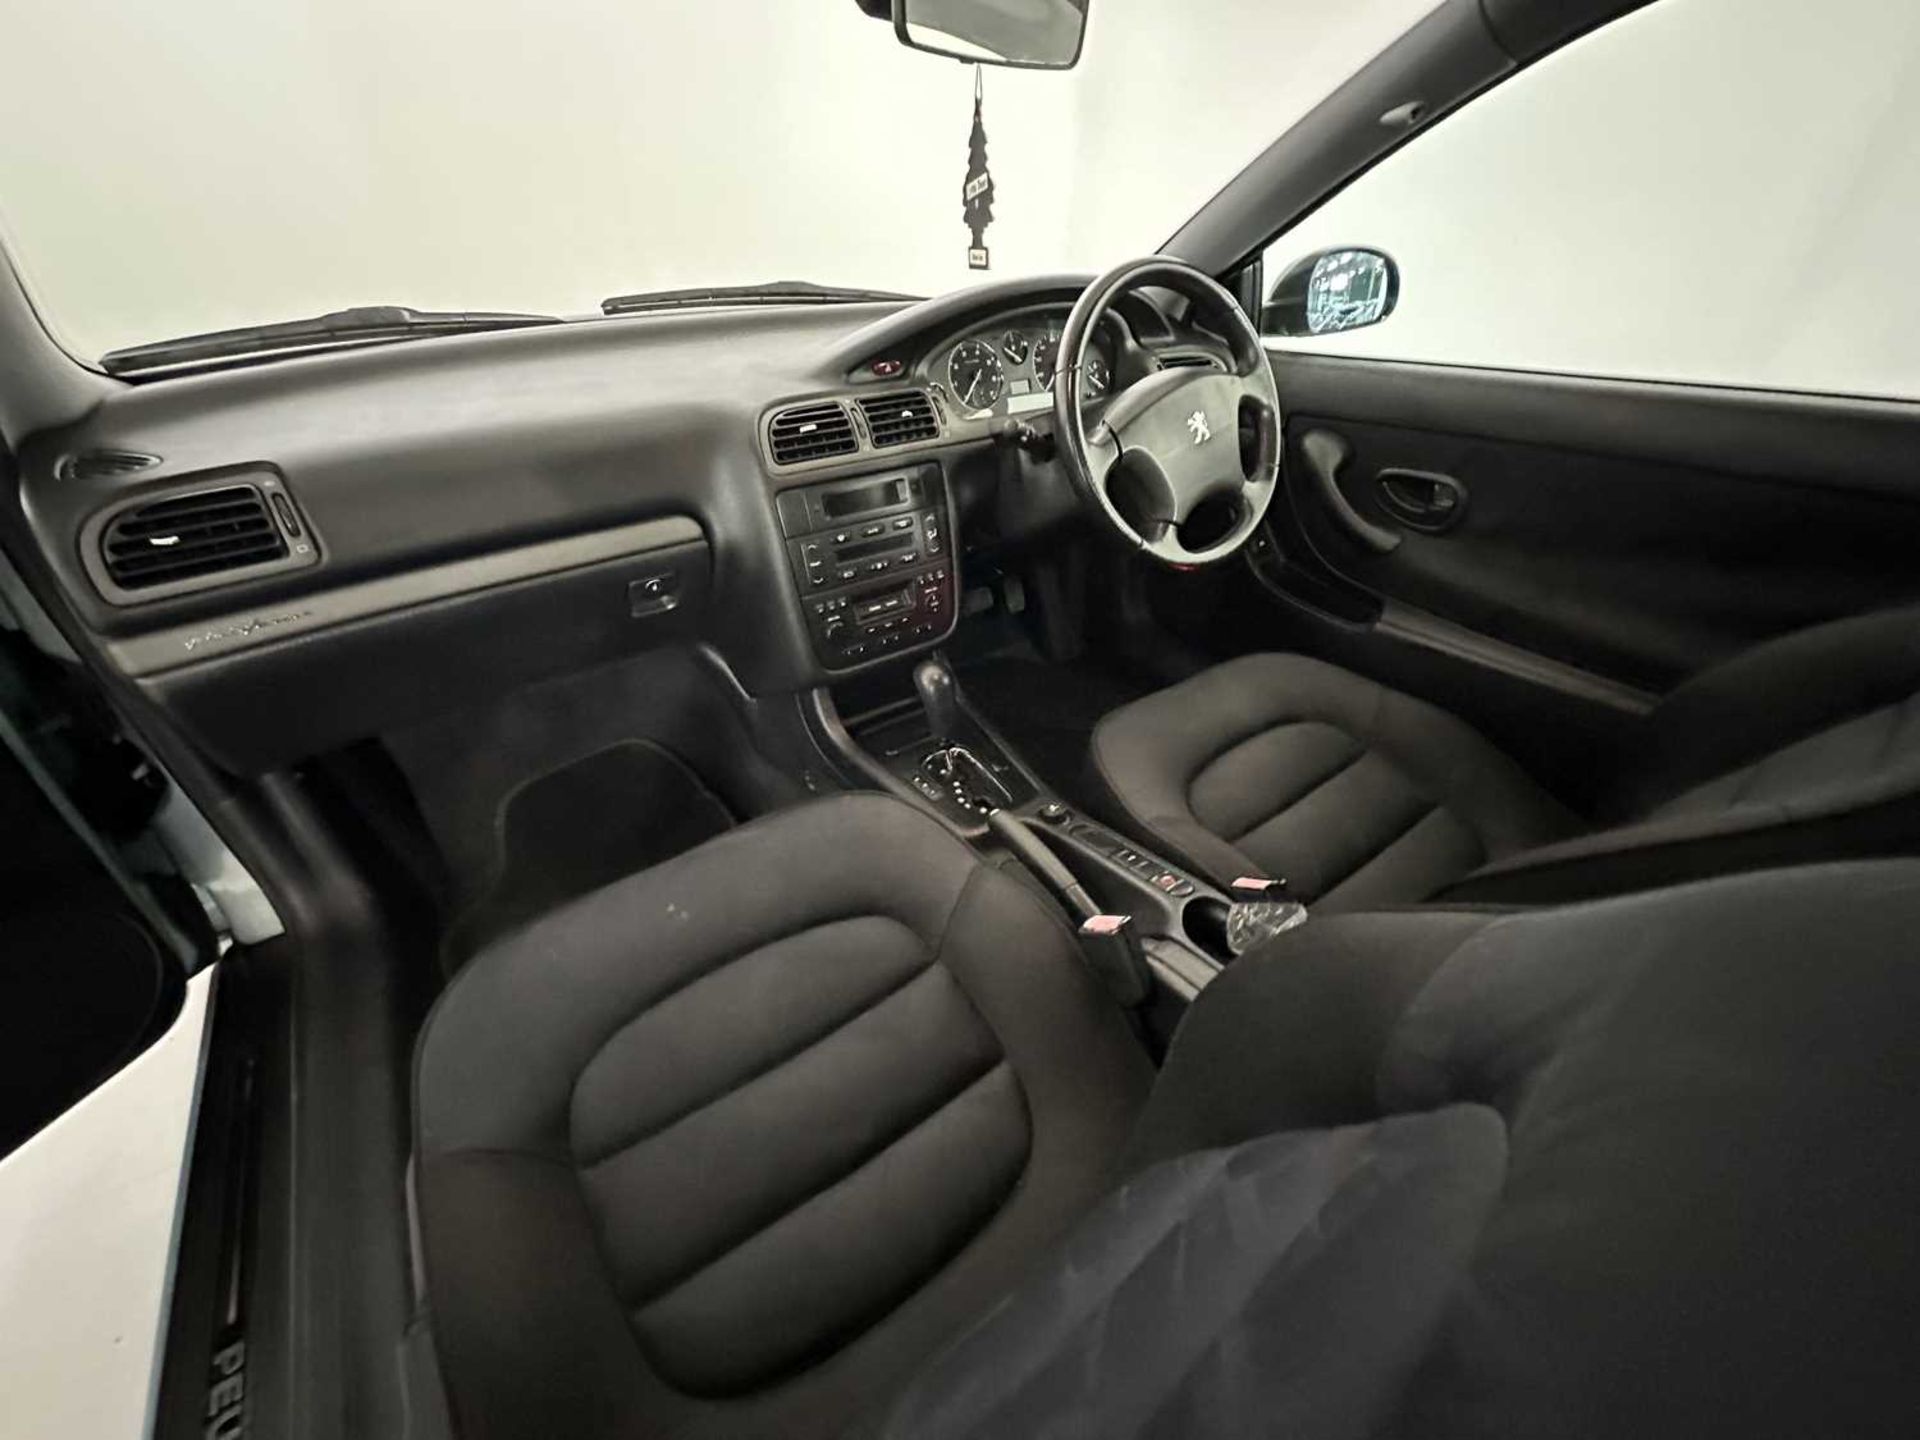 2002 Peugeot 406 Coupe - Image 22 of 28